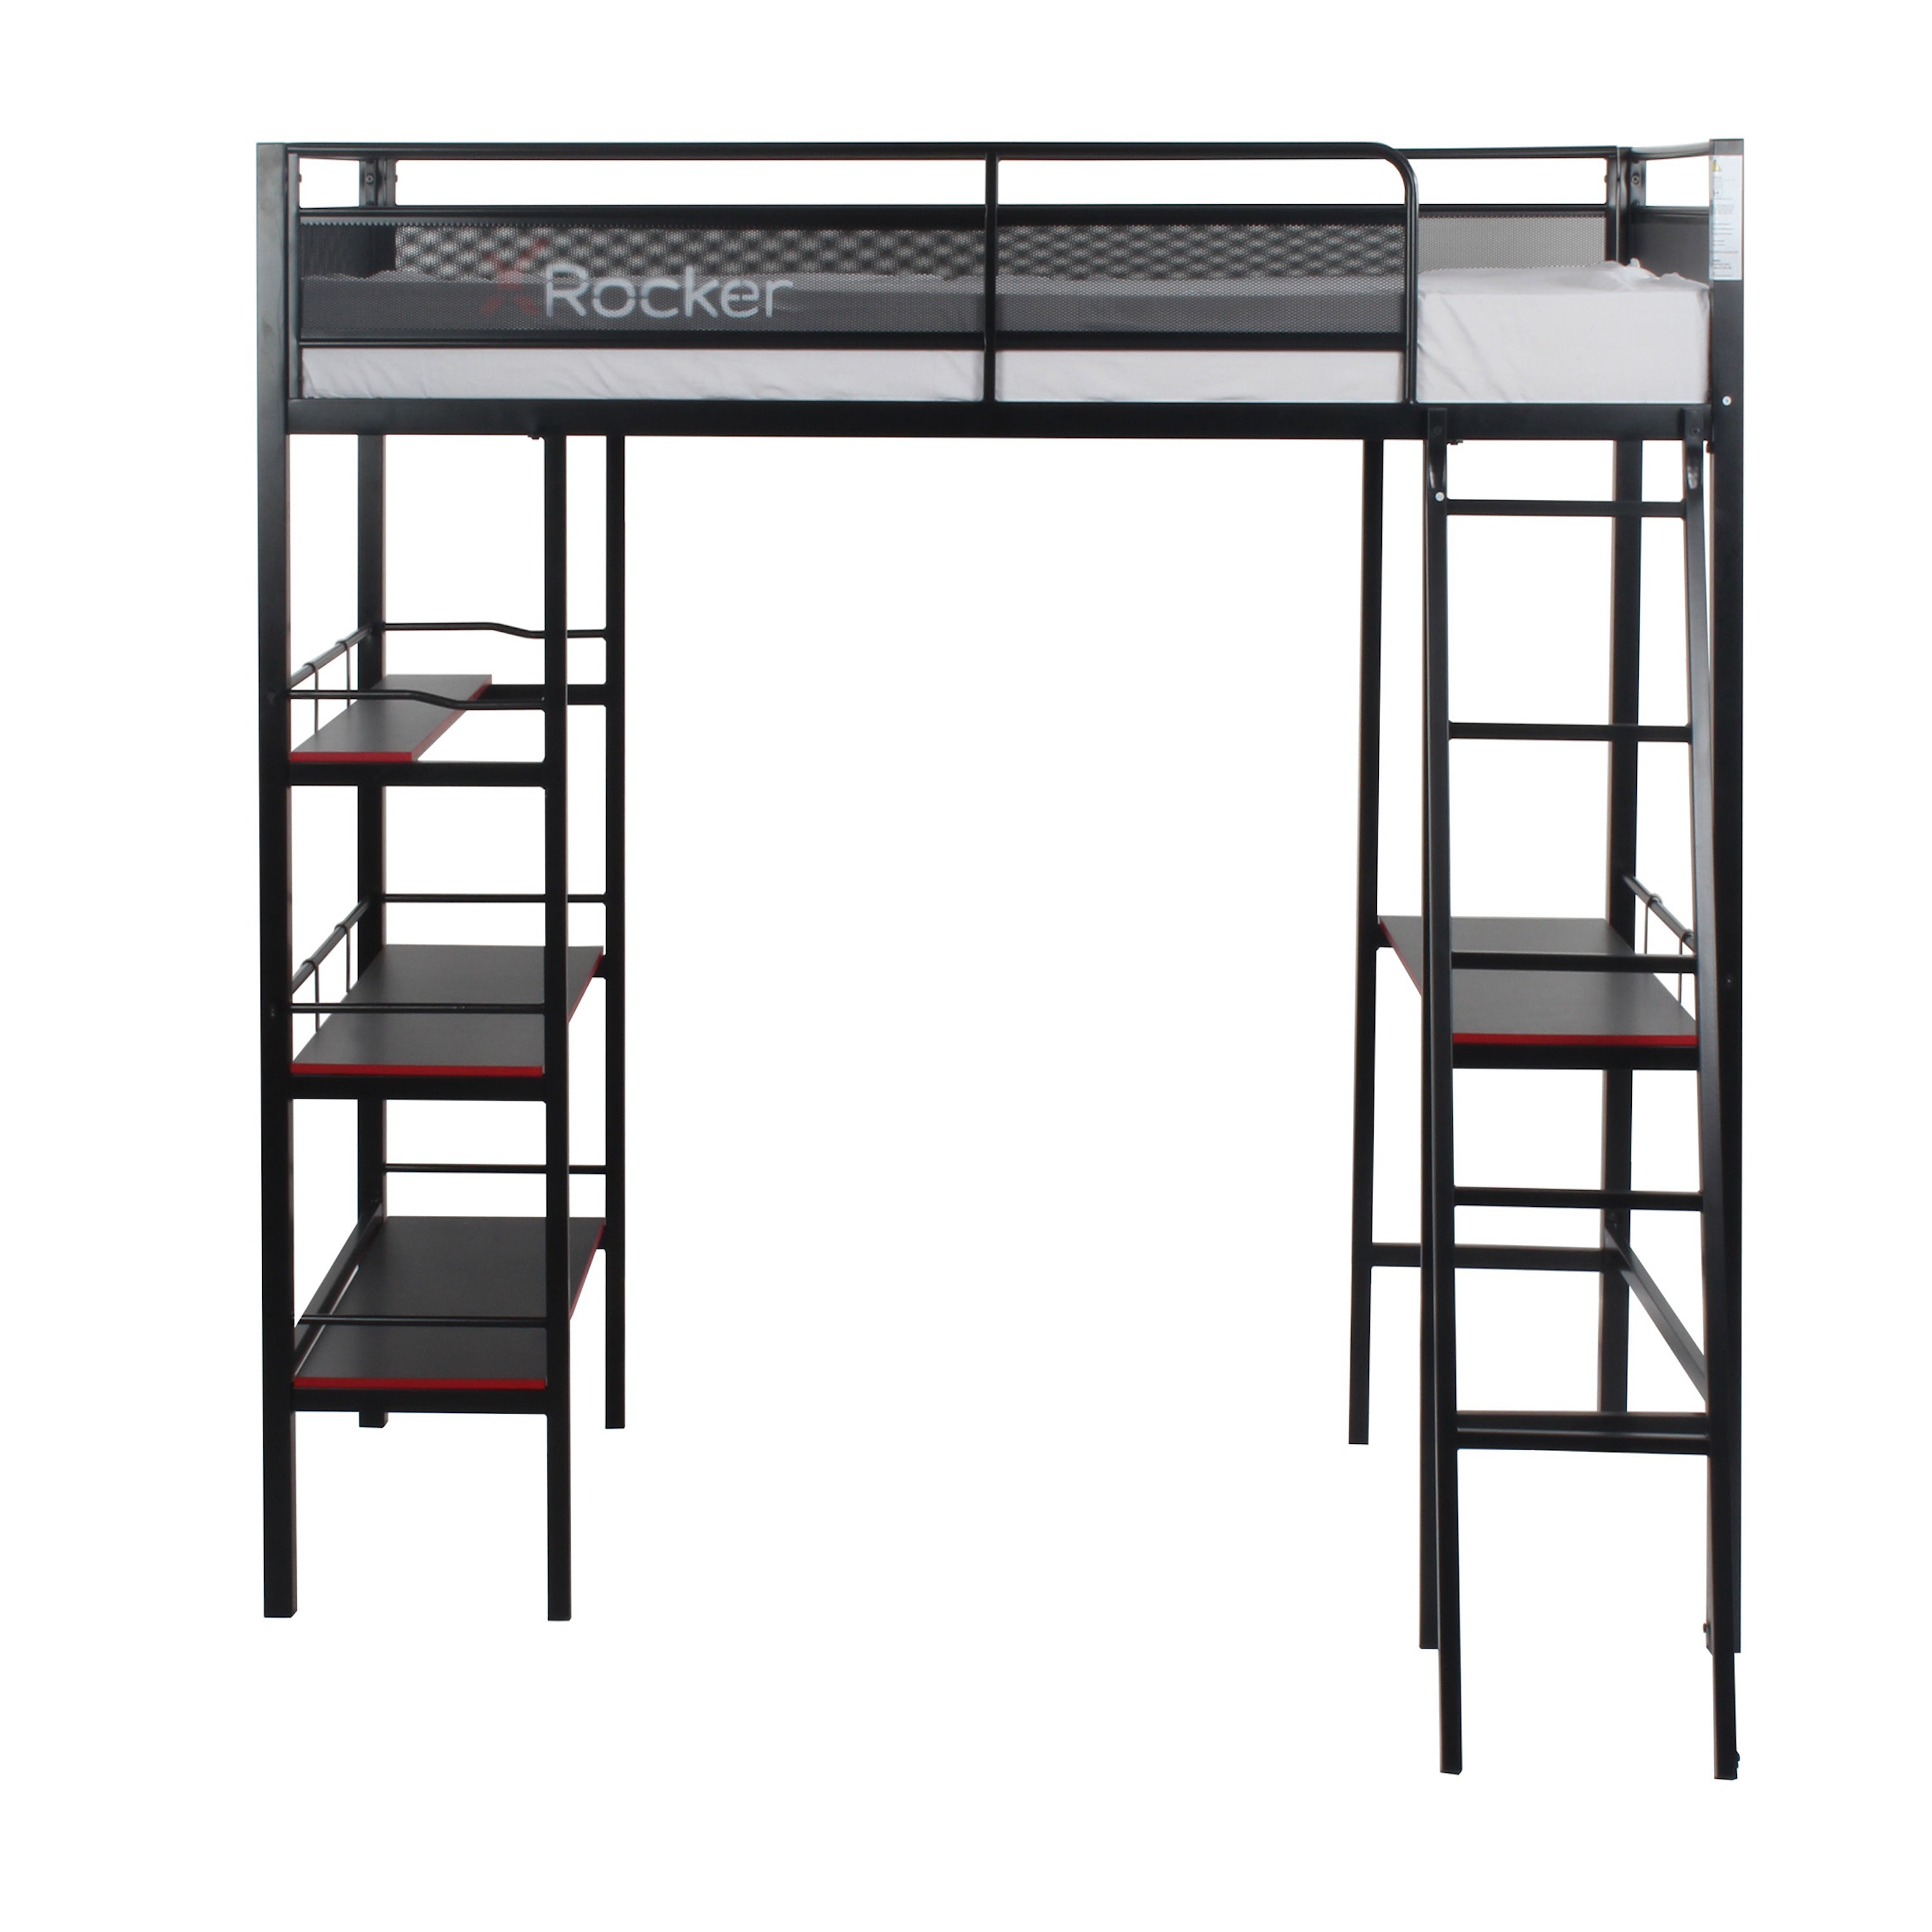 Fortress Gaming Bunk with Desk and Shelving Built-in, Black, Twin